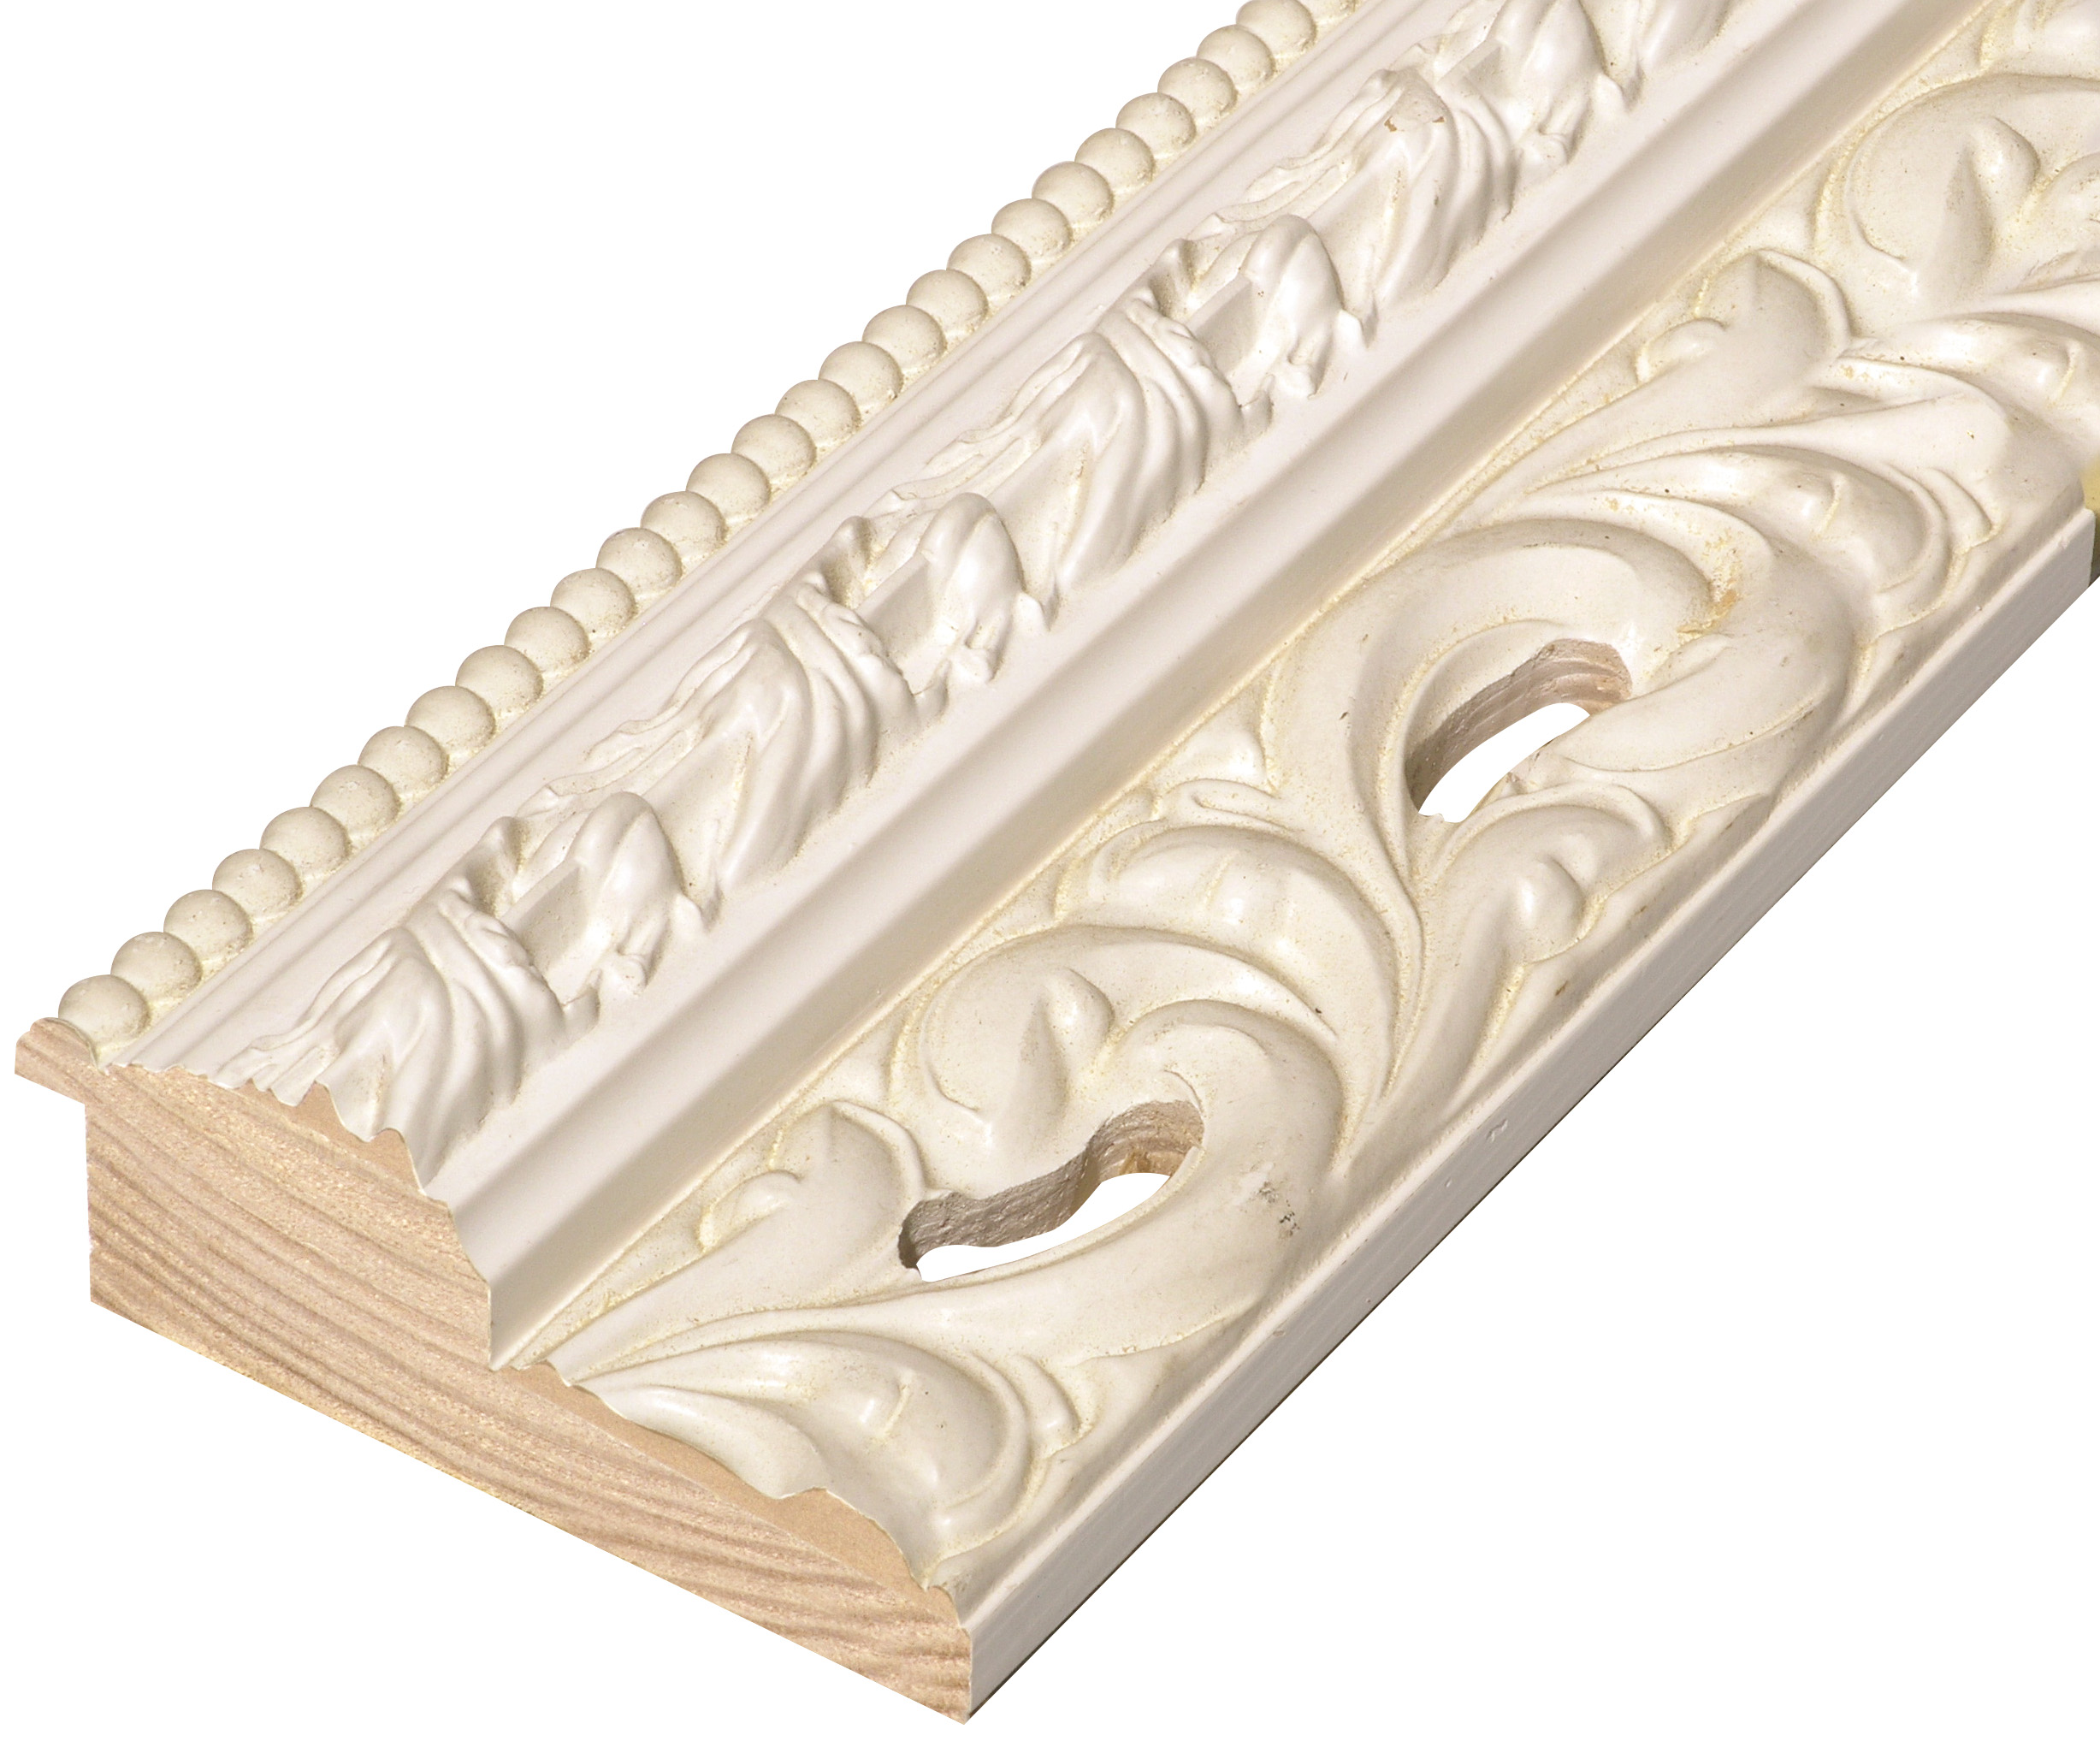 Moulding finger-jointed pine Width 100mm - Cream, decorations - 981CREMA